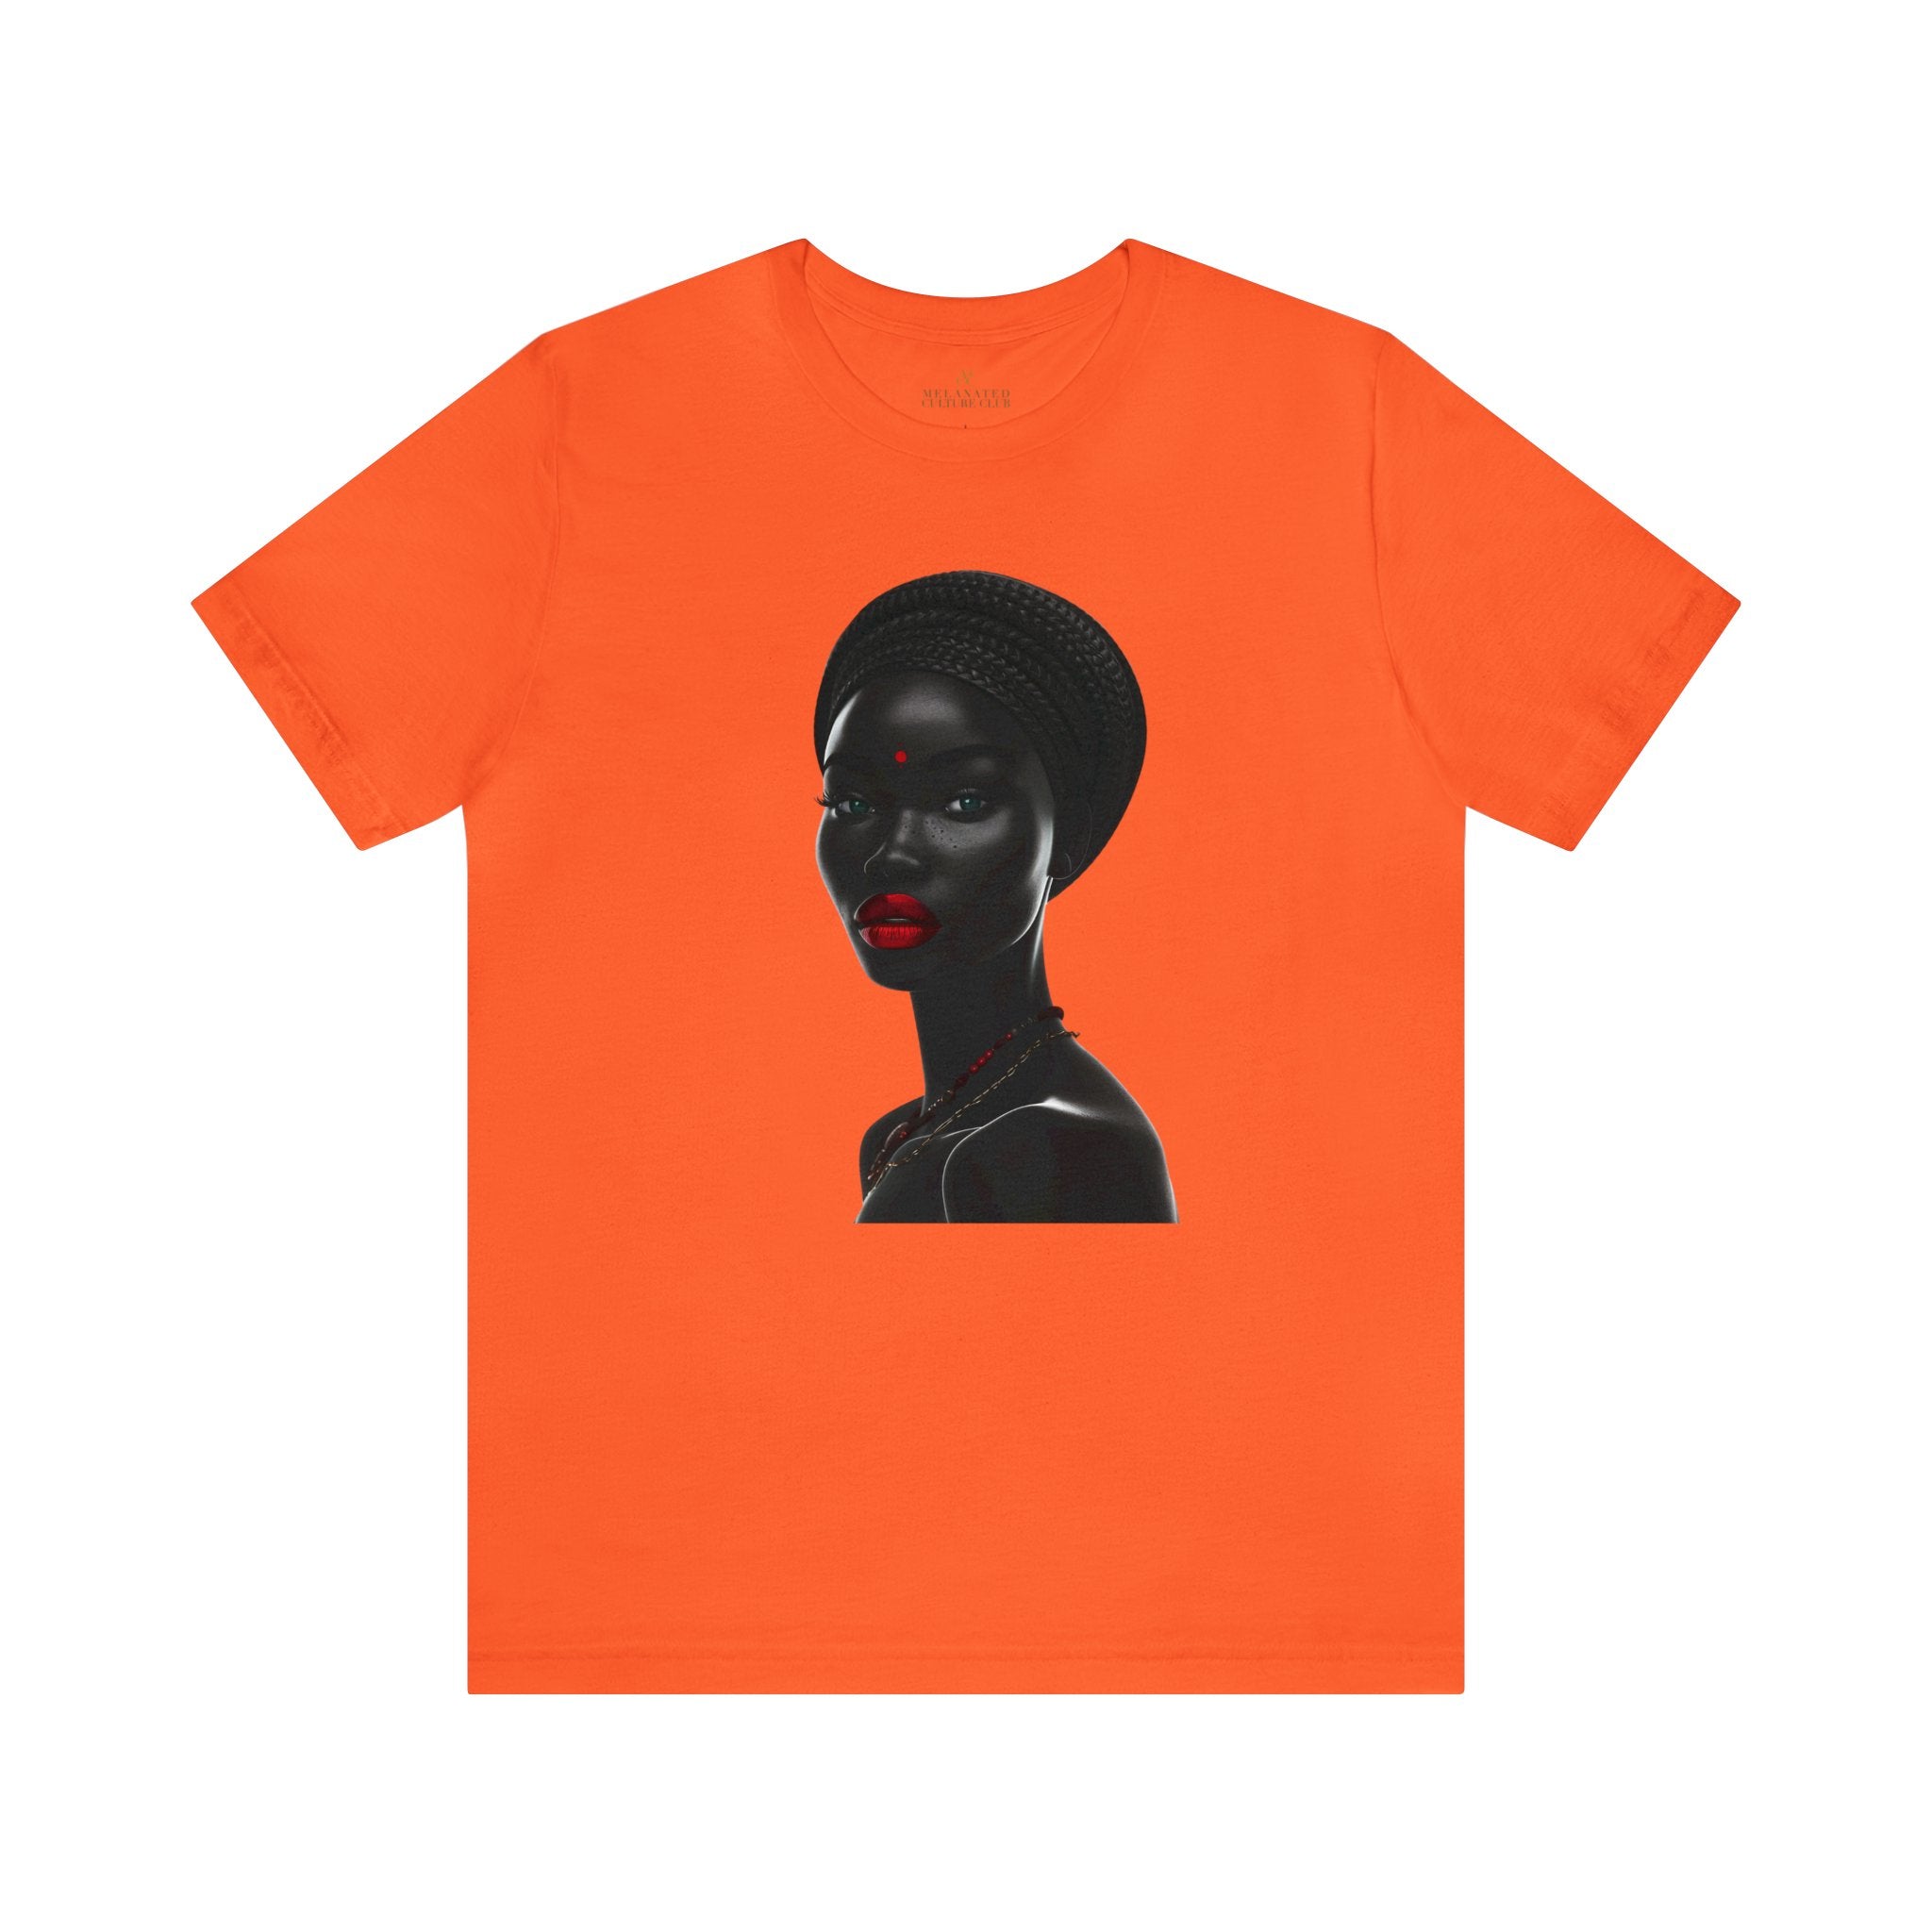 Afrocentric Black Beauty tee shirt in orange.